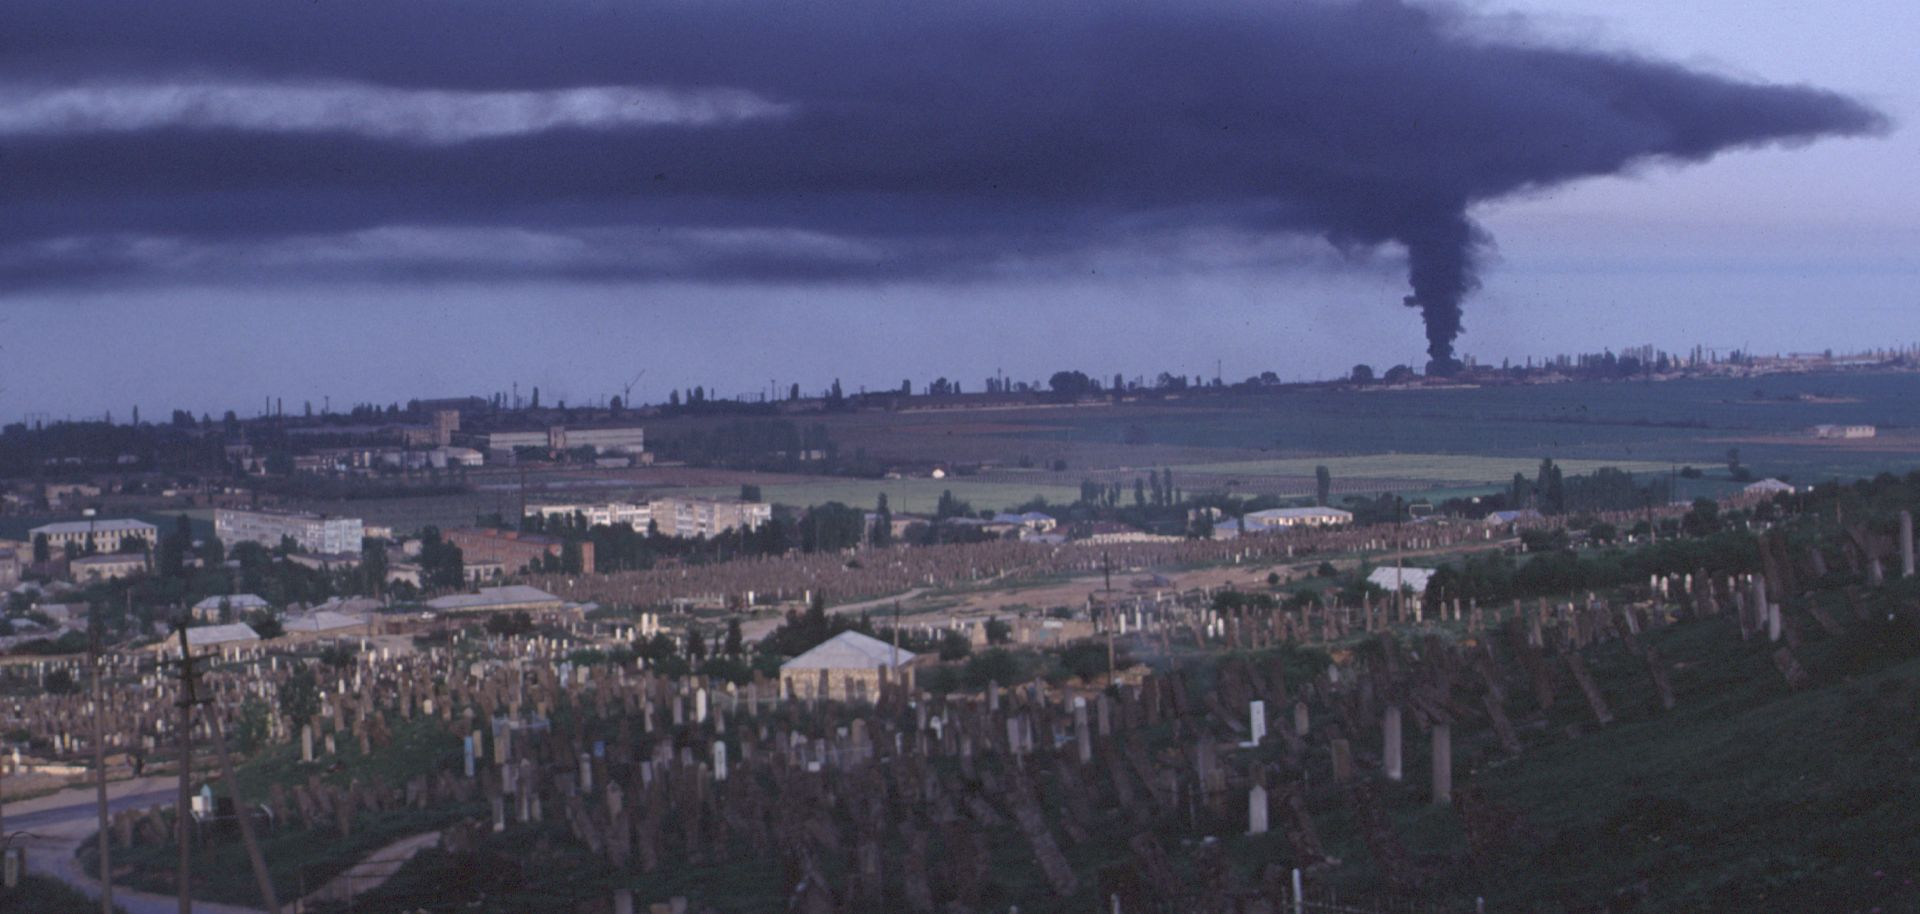 View of the town and an historic Ottoman Empire cemetery as plumes of black smoke pours from a tire factory.